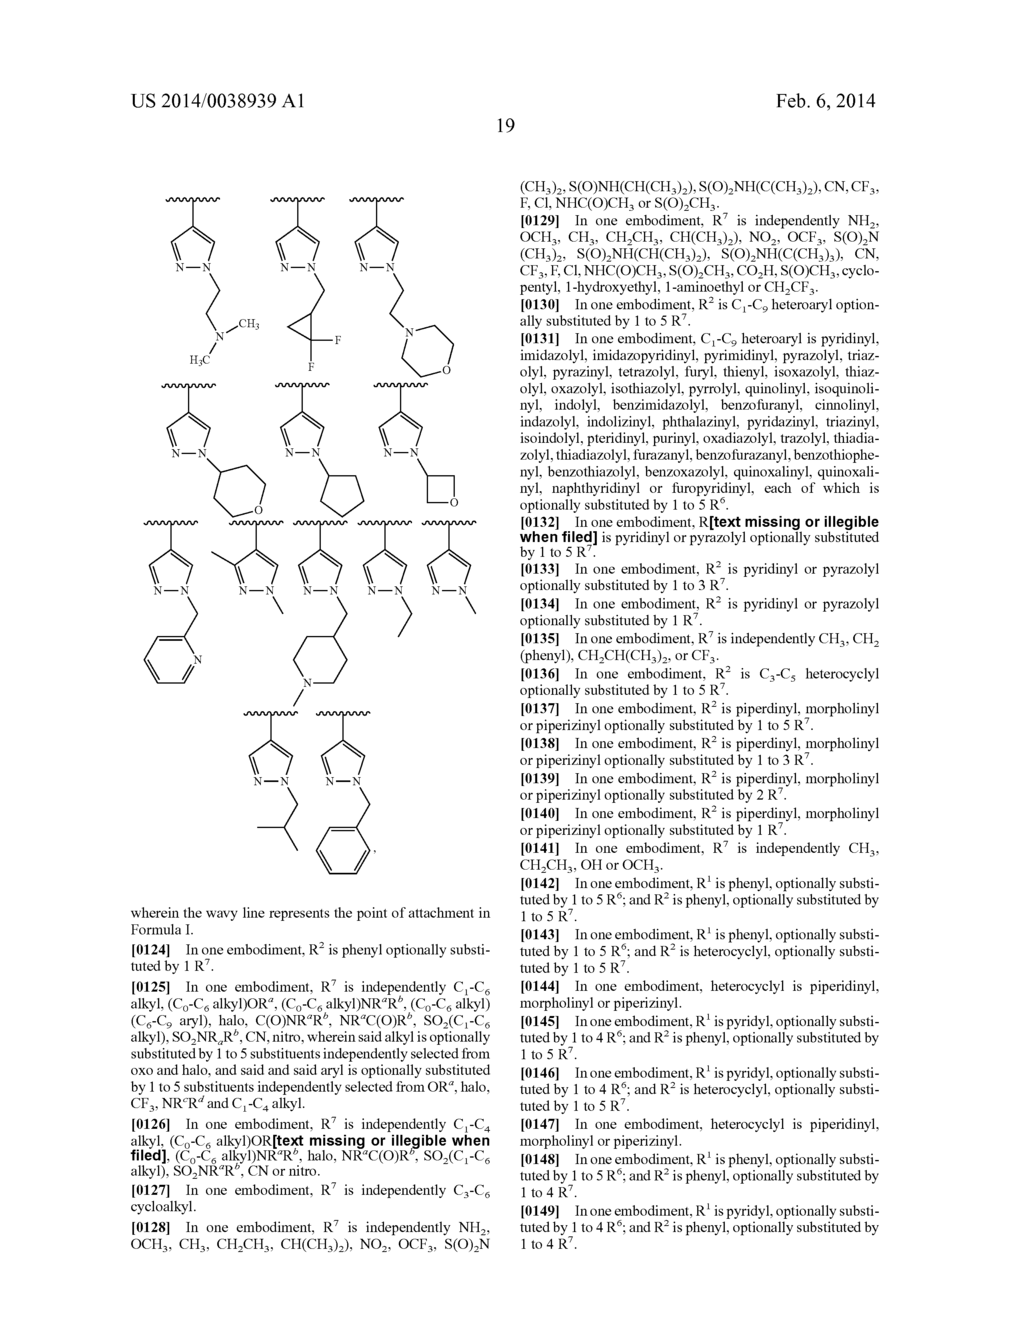 TRIAZOLOPYRIDINE JAK INHIBITOR COMPOUNDS AND METHODS - diagram, schematic, and image 20